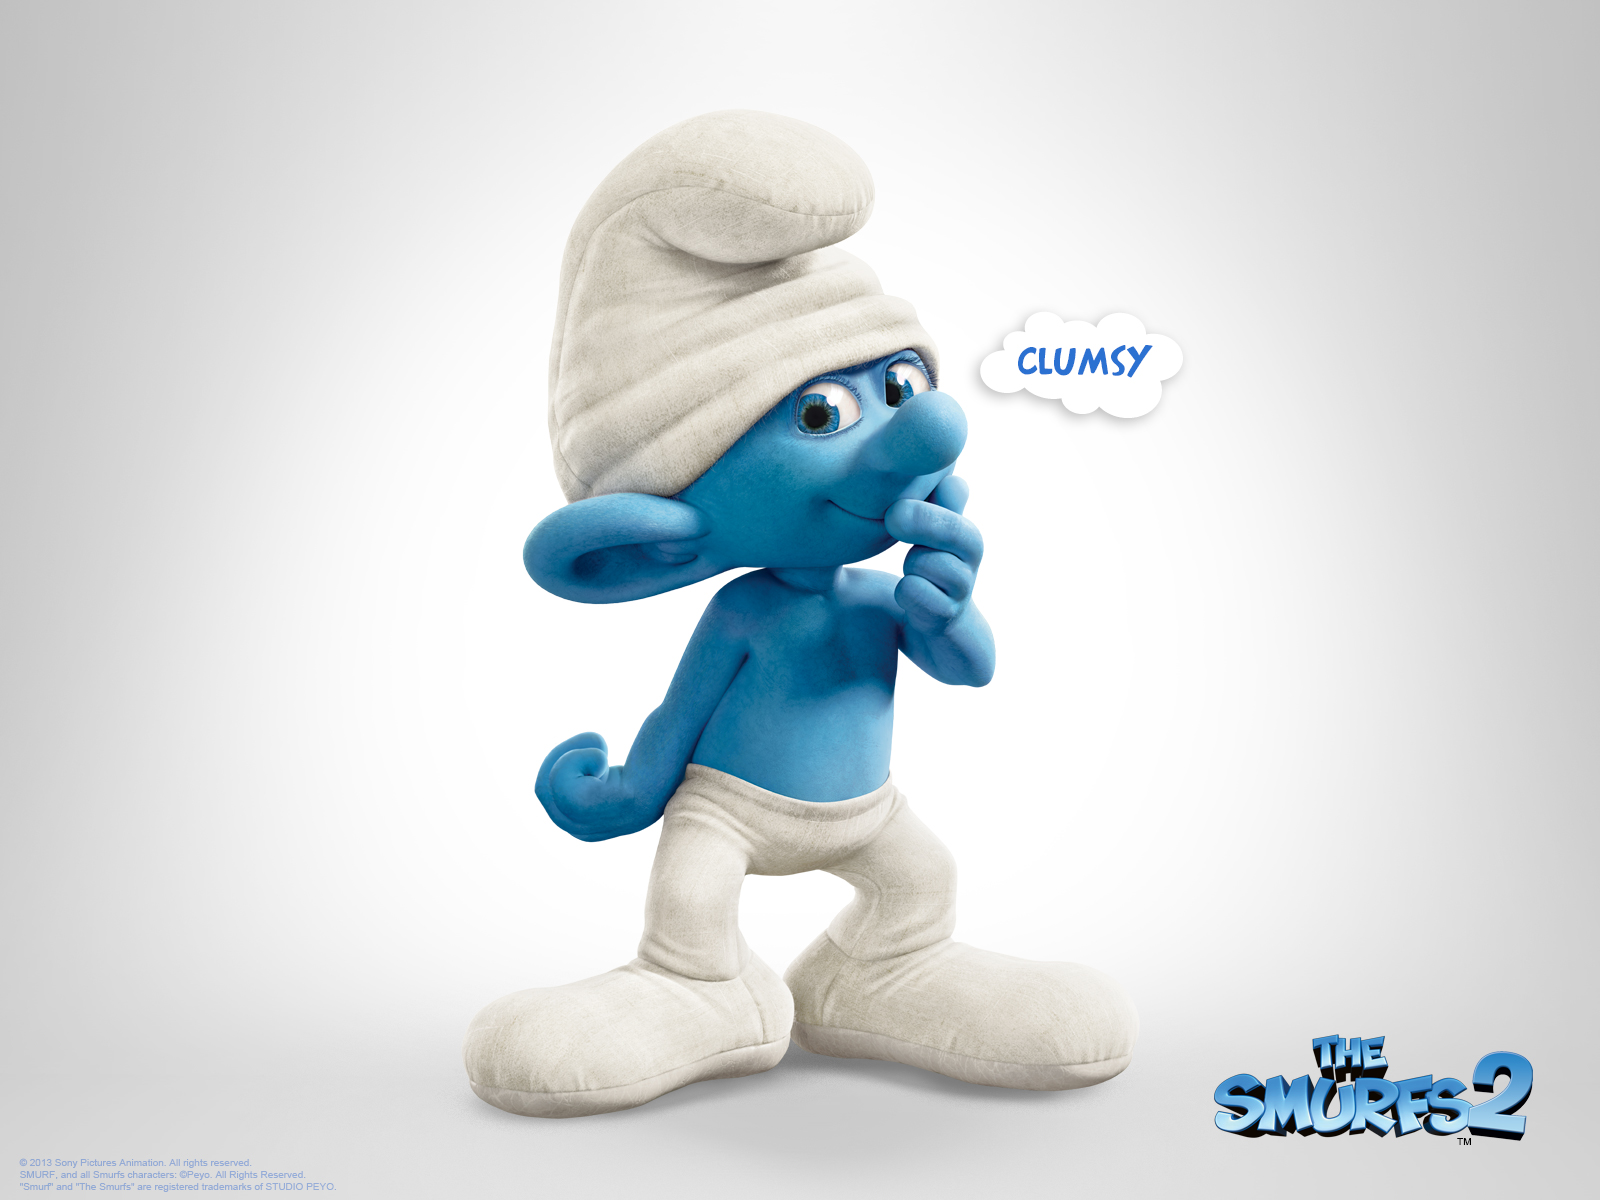 Clumsy - The Smurfs 2 | Live HD Wallpapers